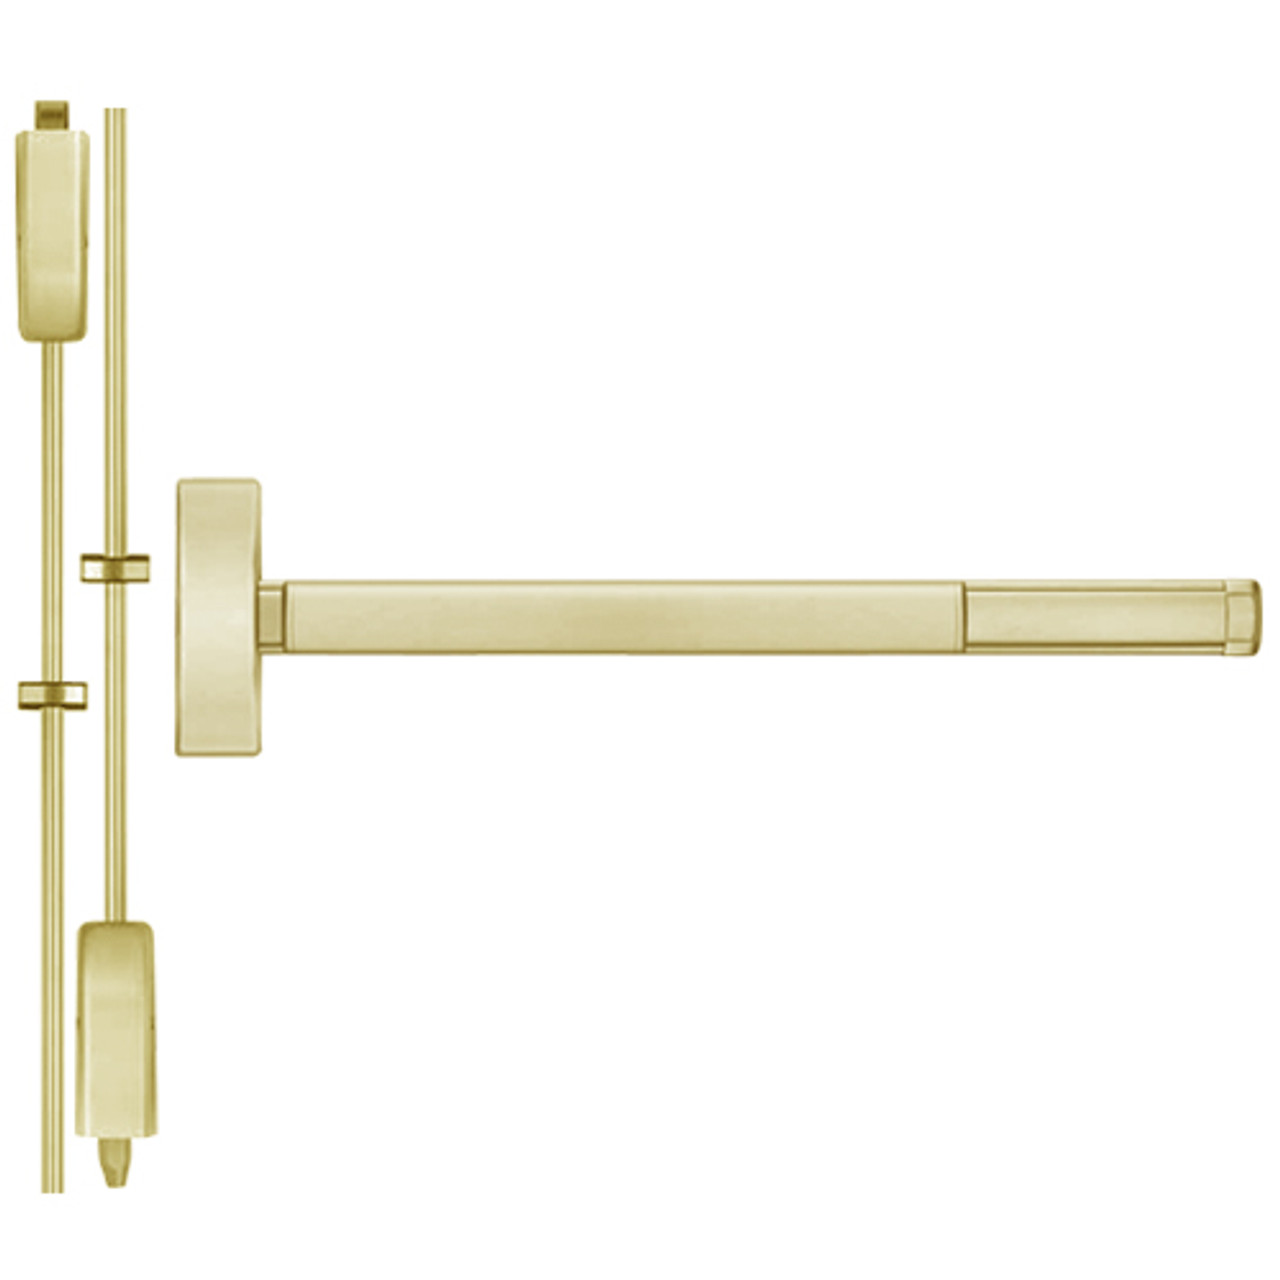 TSFL2205-606-36 PHI 2200 Series Apex Surface Vertical Rod Device with Touchbar Monitoring Switch Prepped for Key Controls Thumb Piece in Satin Brass Finish